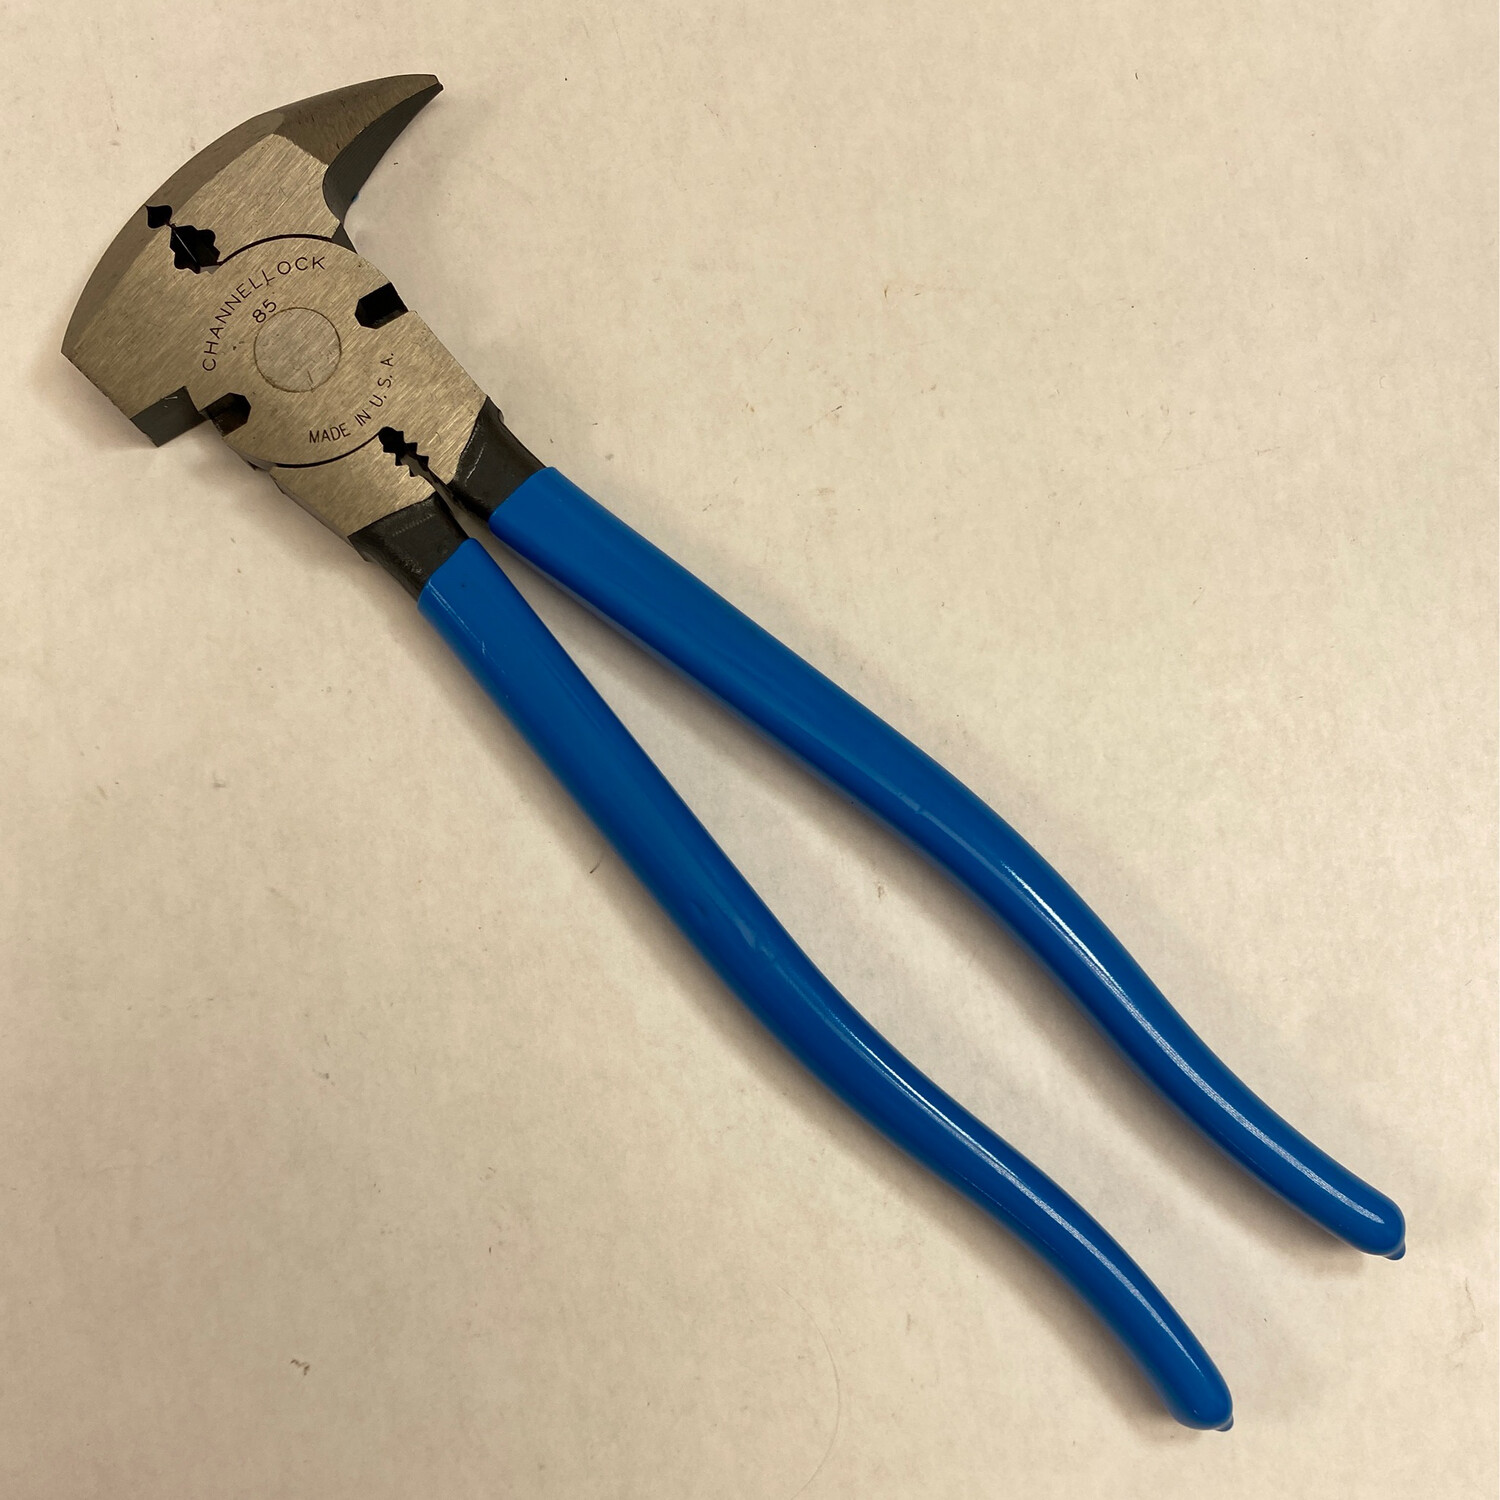 Channellock 85 Fence Tool Plier 10-1/2” Long